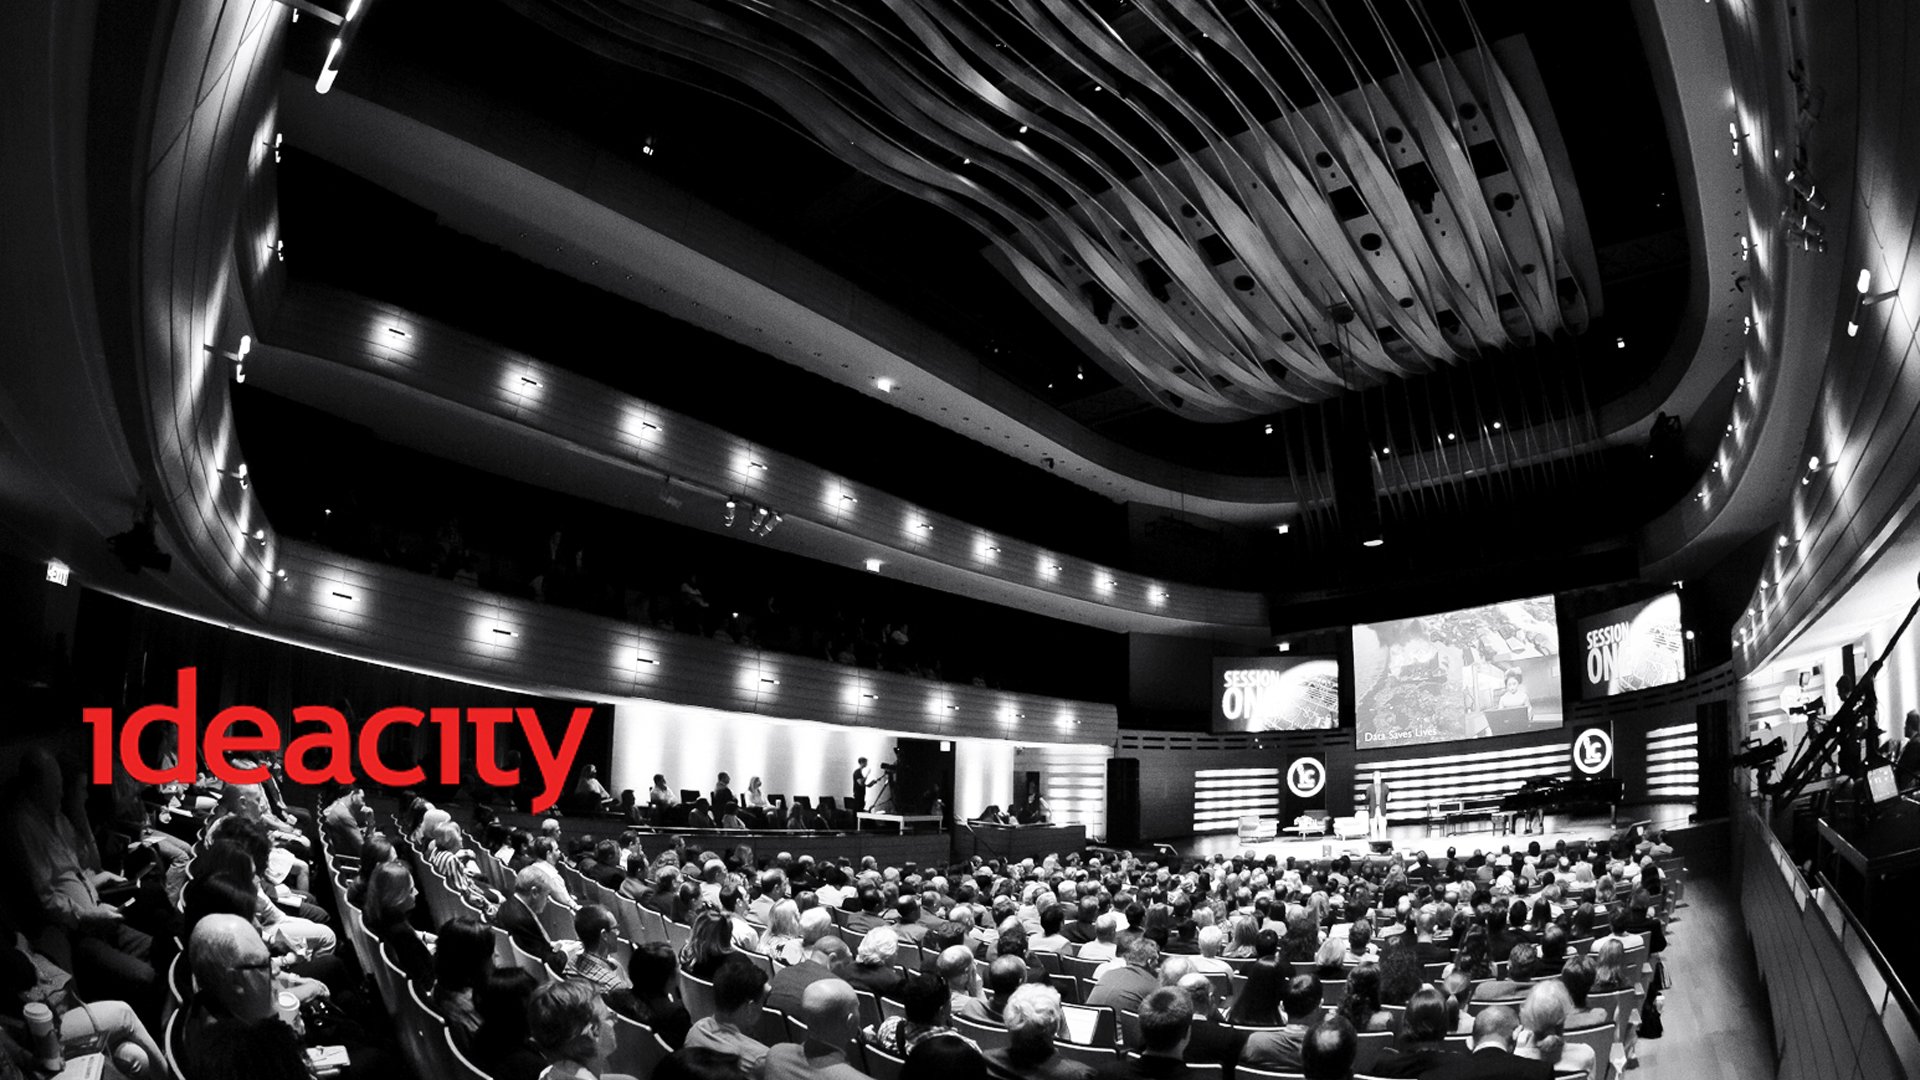 Mining session at ideacity